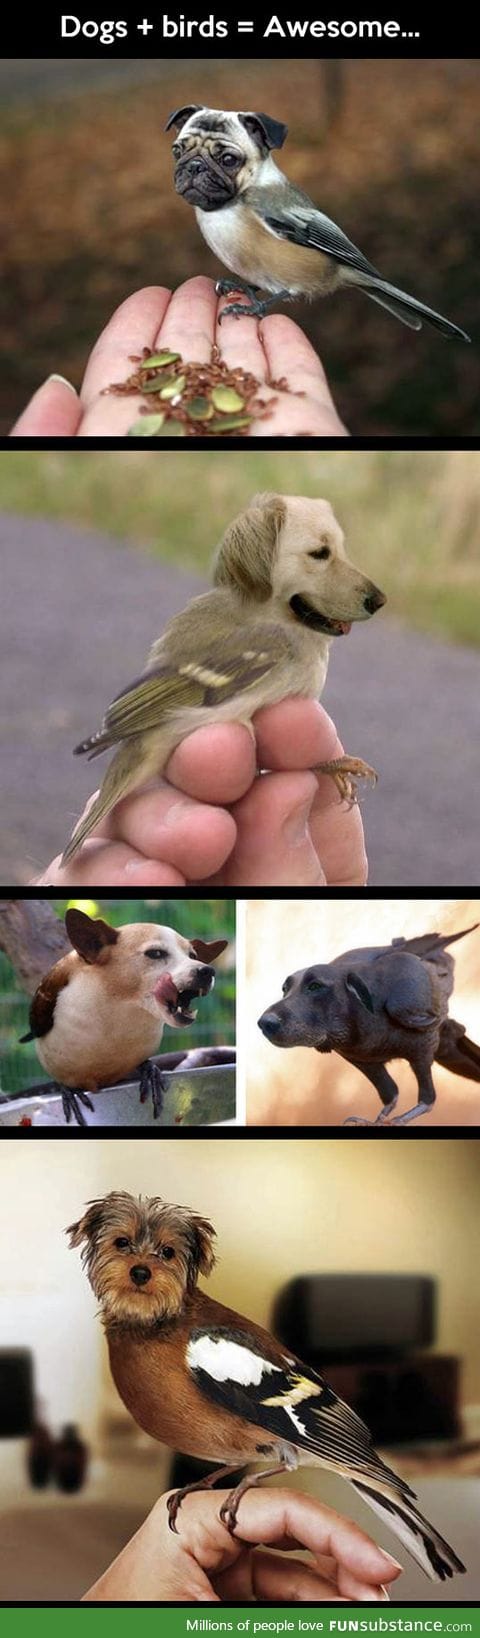 If you mix dogs and birds